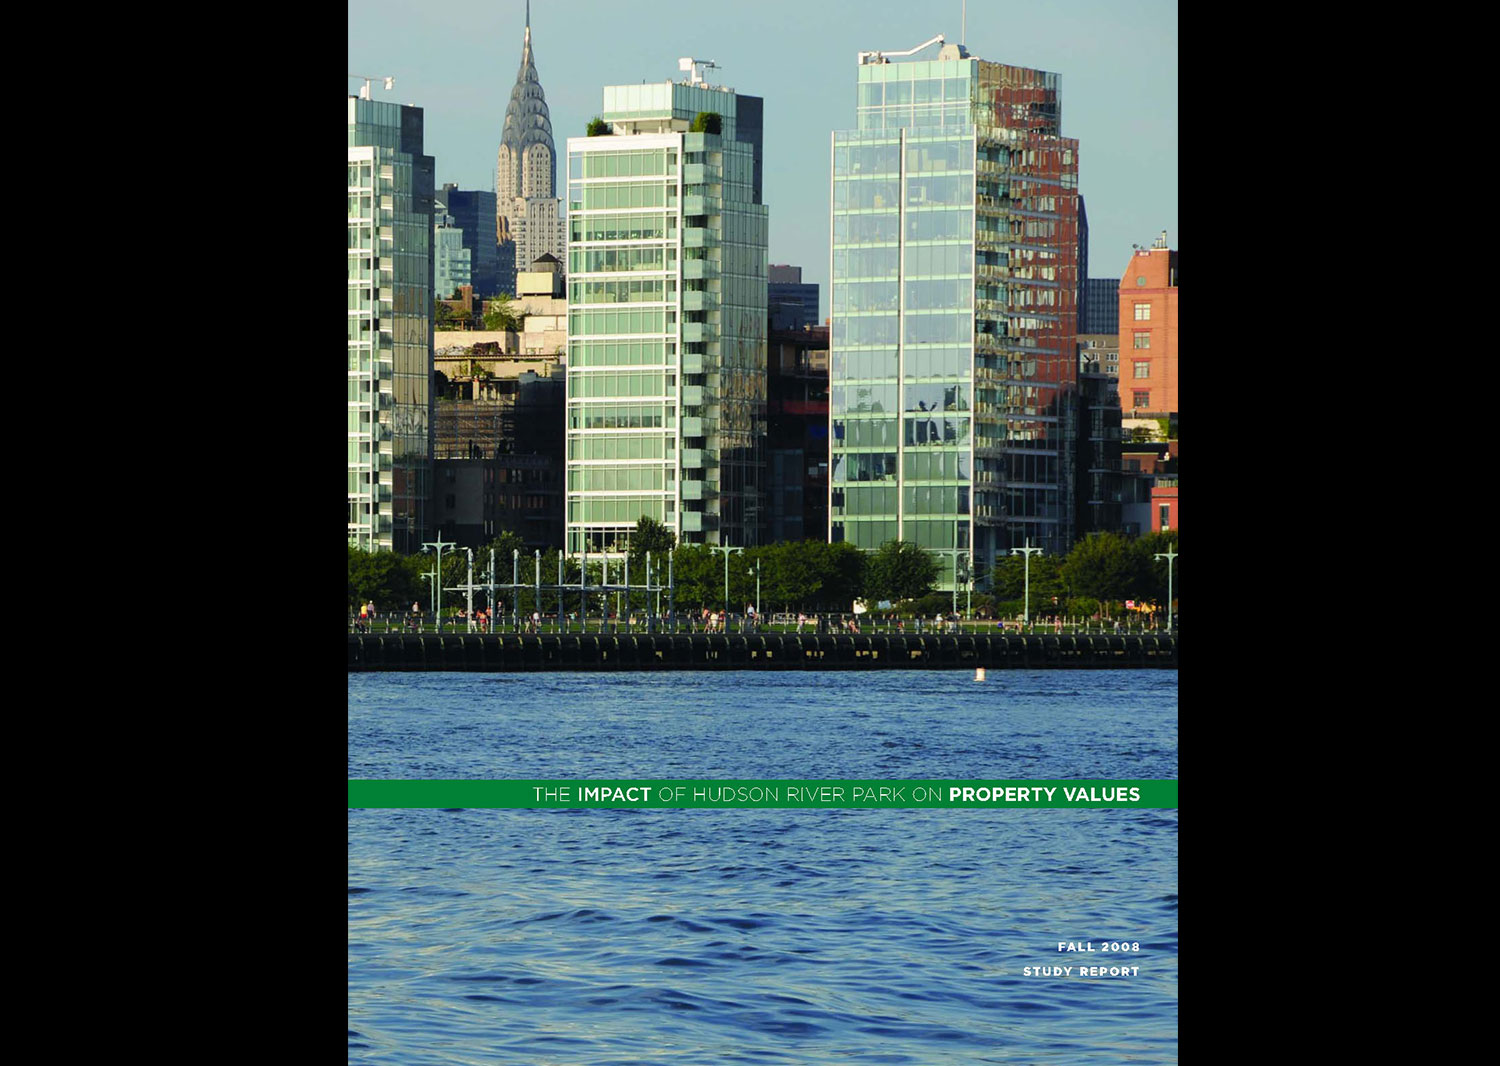 The Impact of Hudson River Park on Property Values 2008